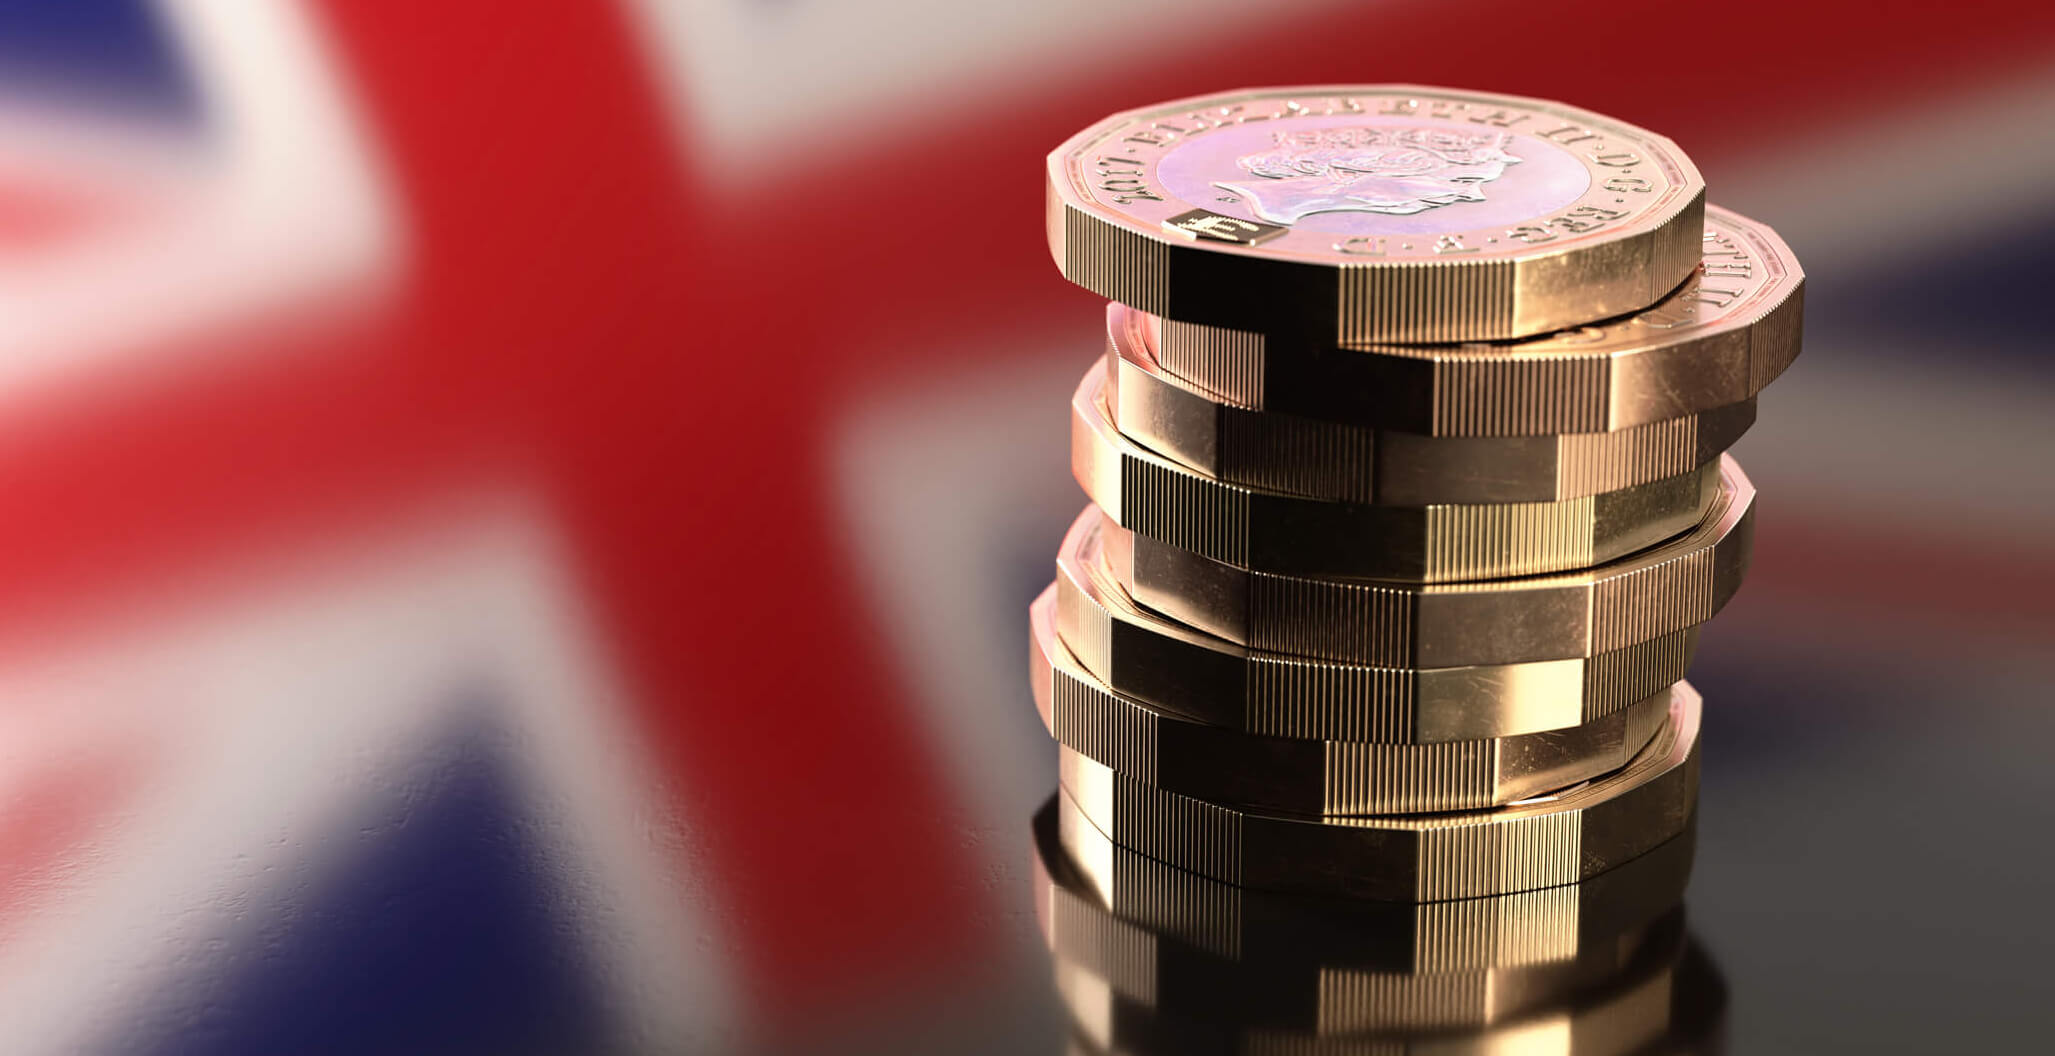 Improved mood helps sterling off lows against Euro, Dollar